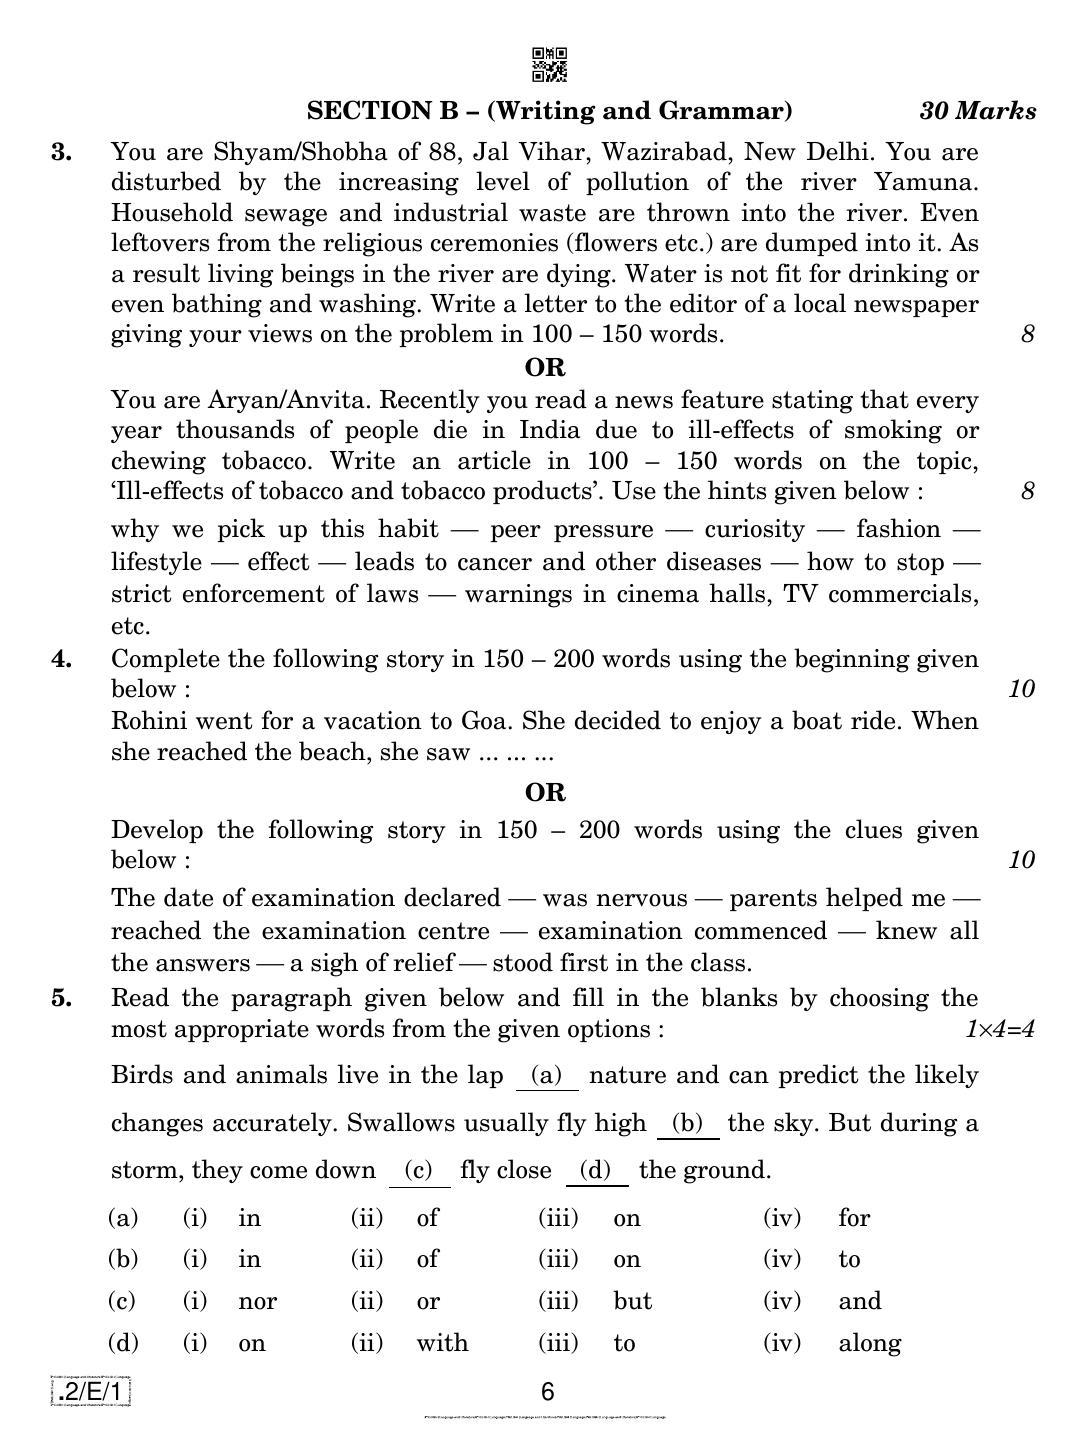 CBSE Class 10 2-C-1 Eng Lang. And Literature 2020 Compartment Question Paper - Page 6